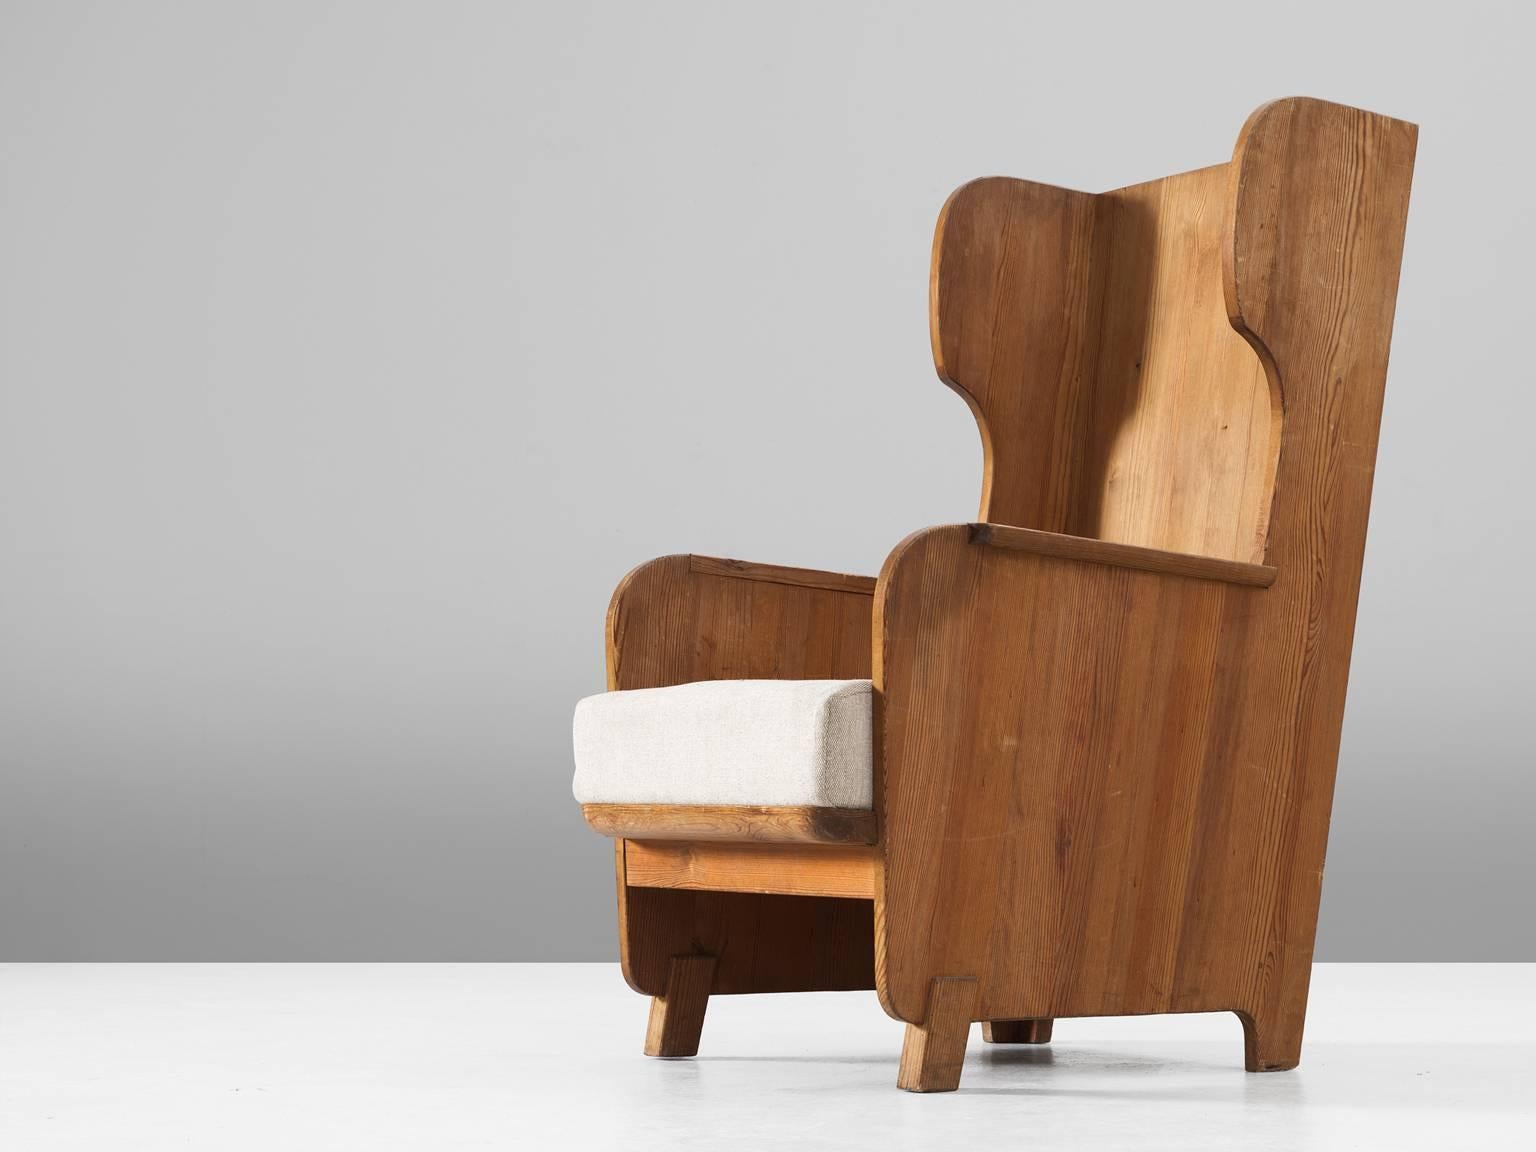 Wingback chair 'Lovö', in pine and fabric, by Axel Einar Hjorth for Nordiska Kompaniet, Sweden, 1932. 

Sturdy high back chair in solid pine by Axel Einar Hjorth. This chair has all classical elements of a wingback chair, yet due the execution in